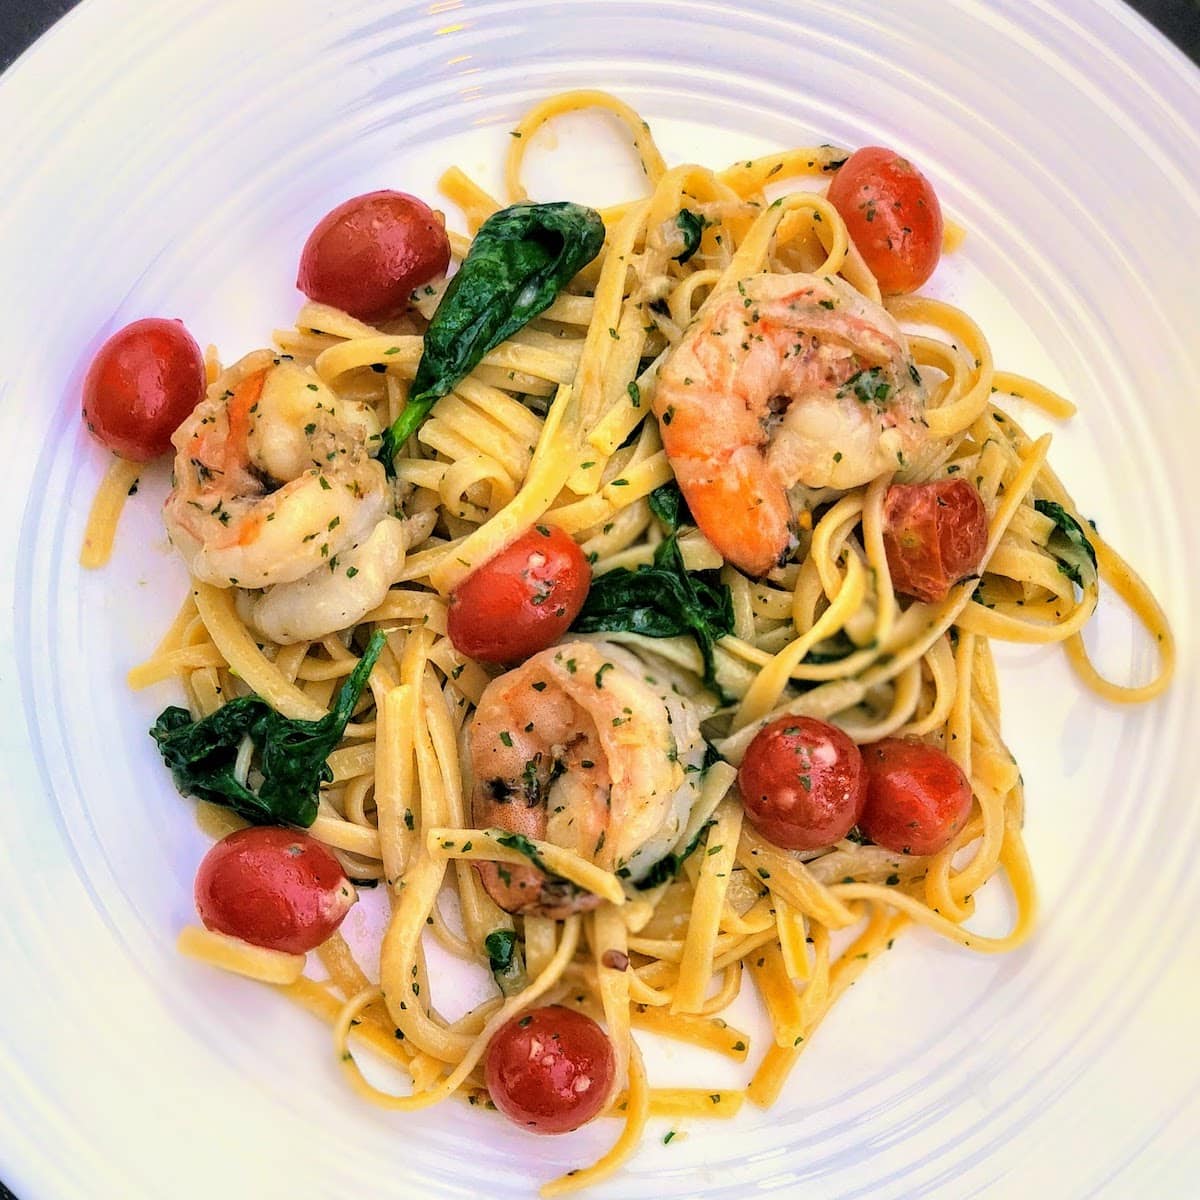 Garlic butter shrimp pasta with tomatoes and spinach on a white plate.